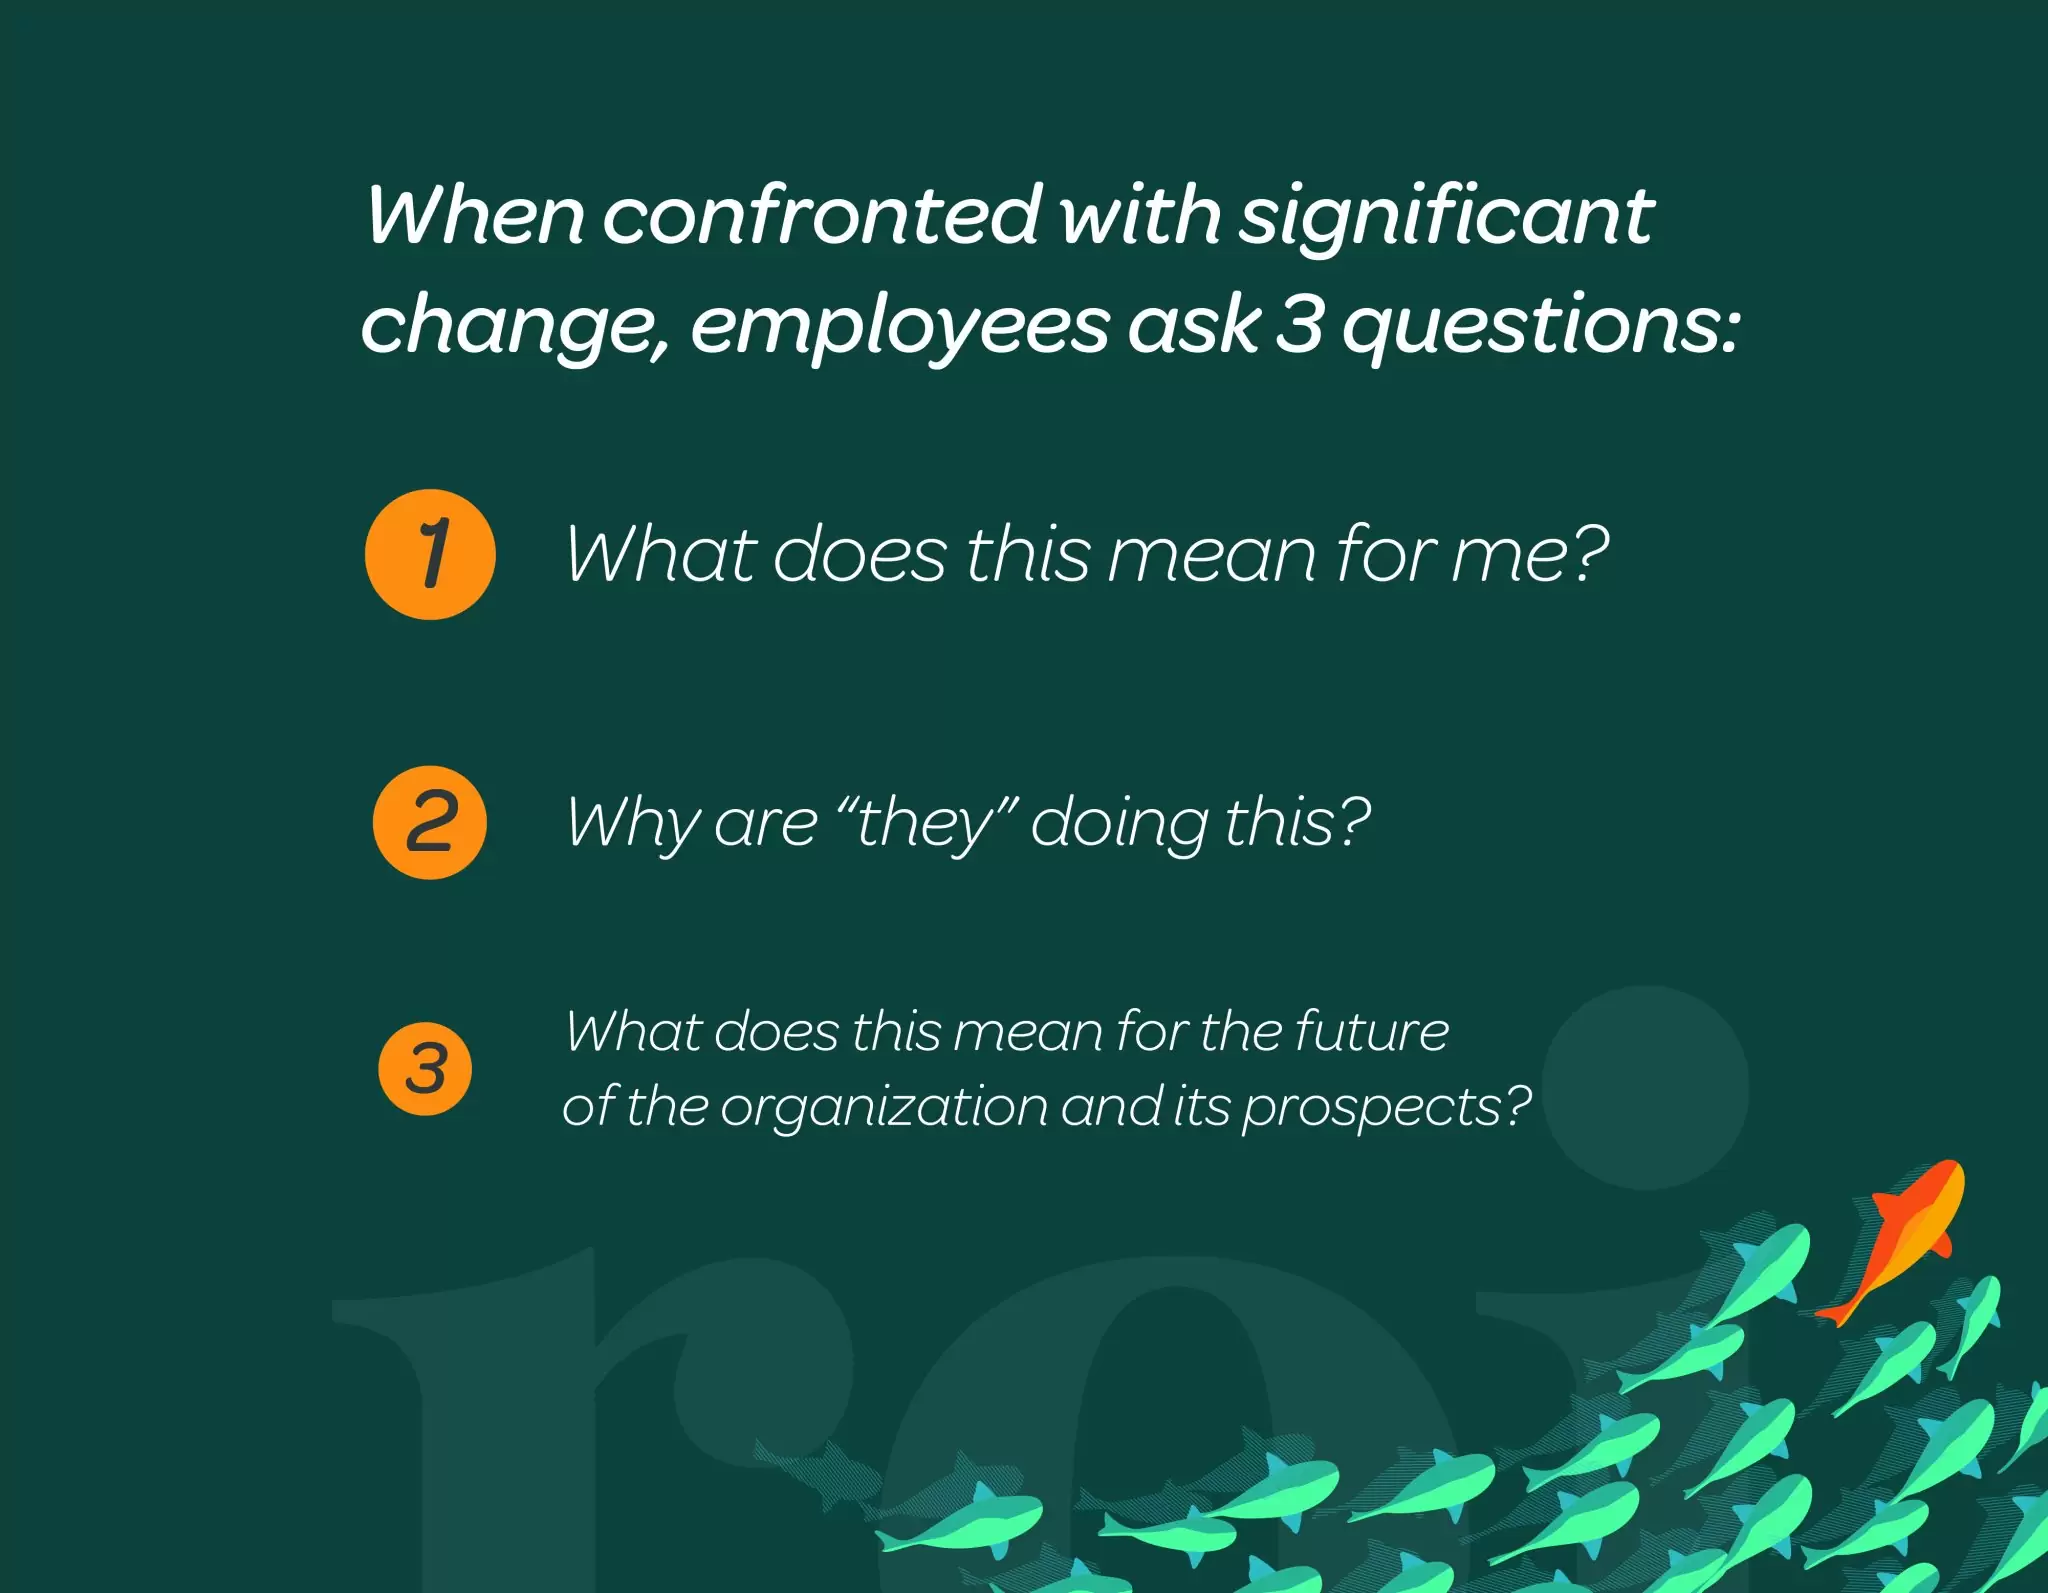 When confronted with significant change, employees ask 3 questions: 1) What does this mean for me? 2) Why are "they" doing this? 3) What does this mean for the future of the organization and its prospects?